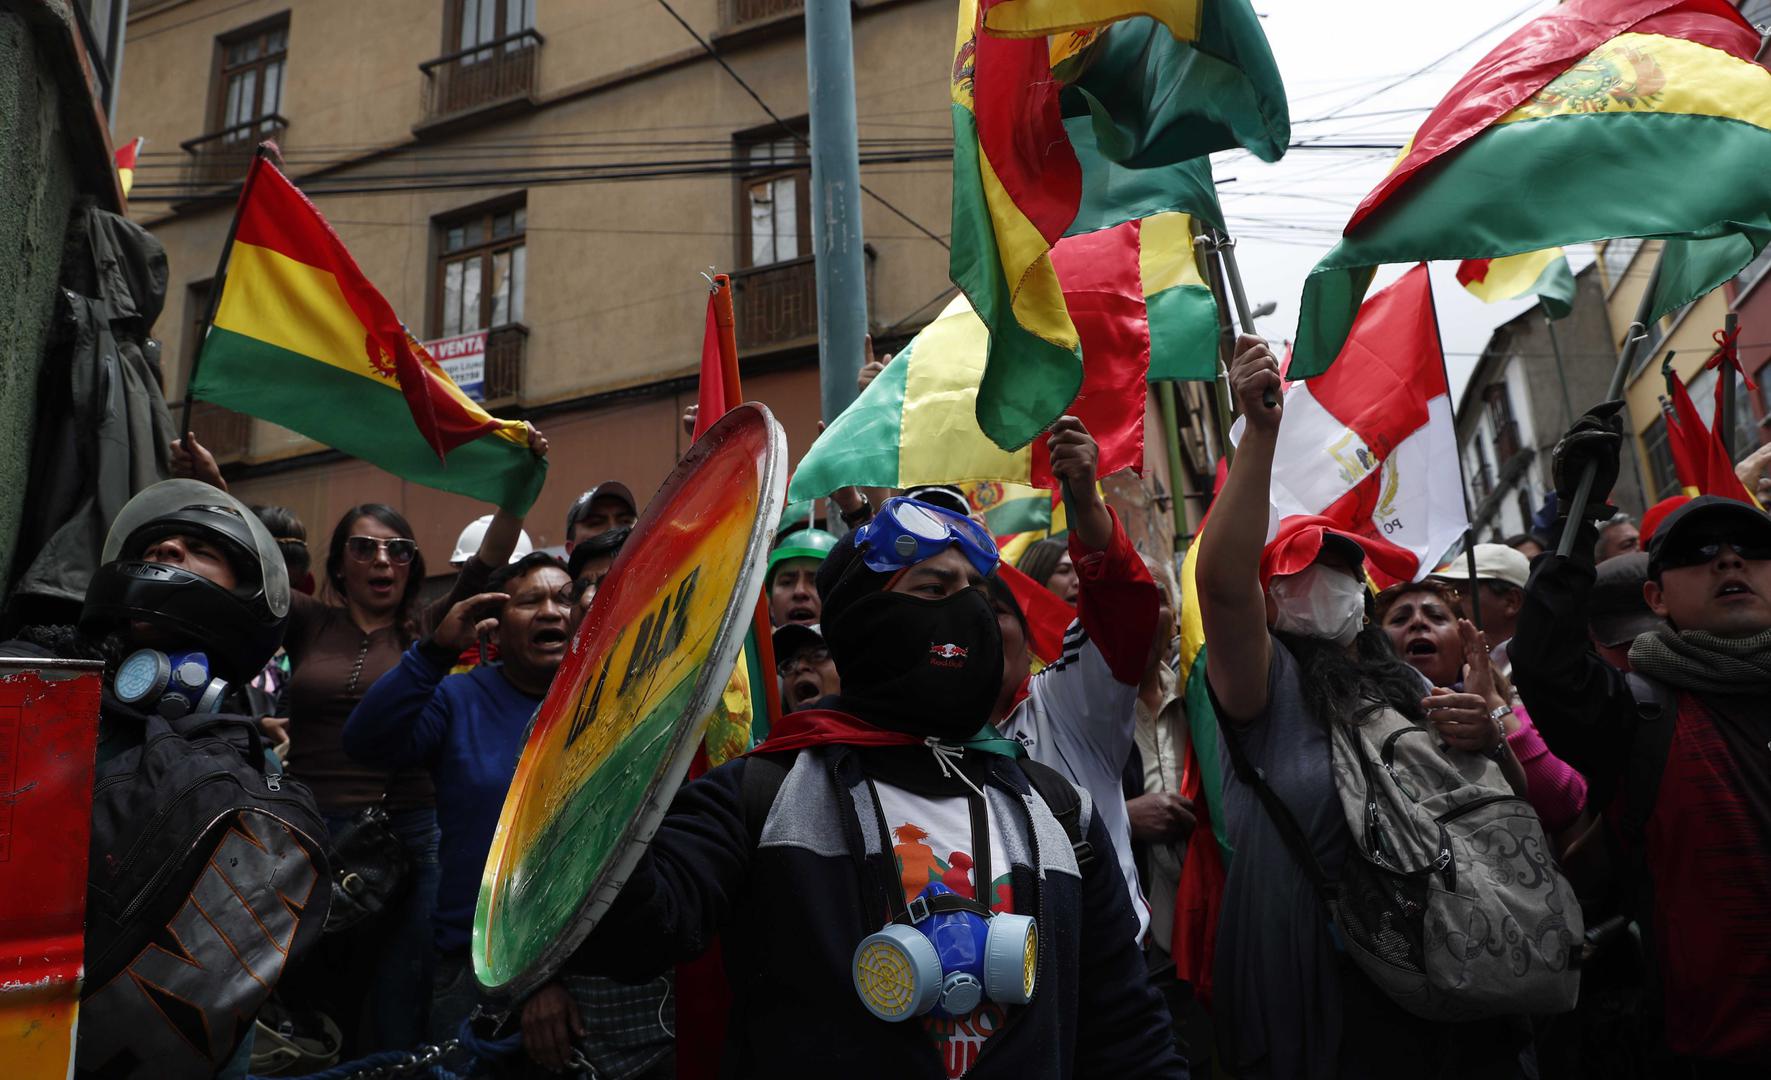 Anti-government protesters against the reelection of President Evo Morales gather just meters away from the presidential palace in La Paz, Bolivia, on Saturday, November 9, 2019.